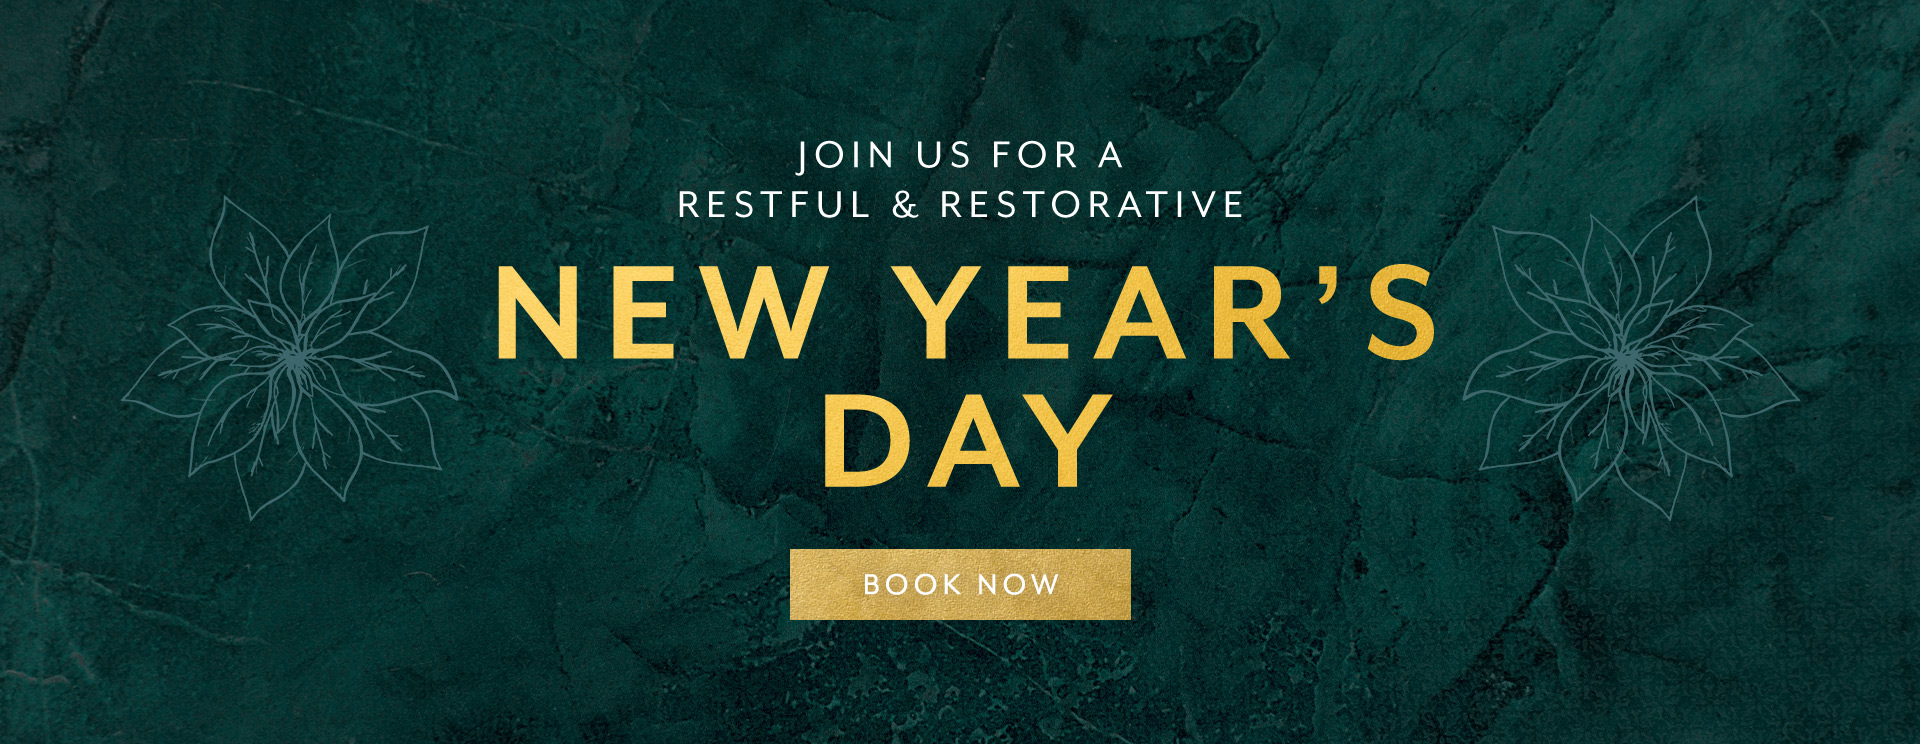 New Year's Day at The Bell Inn